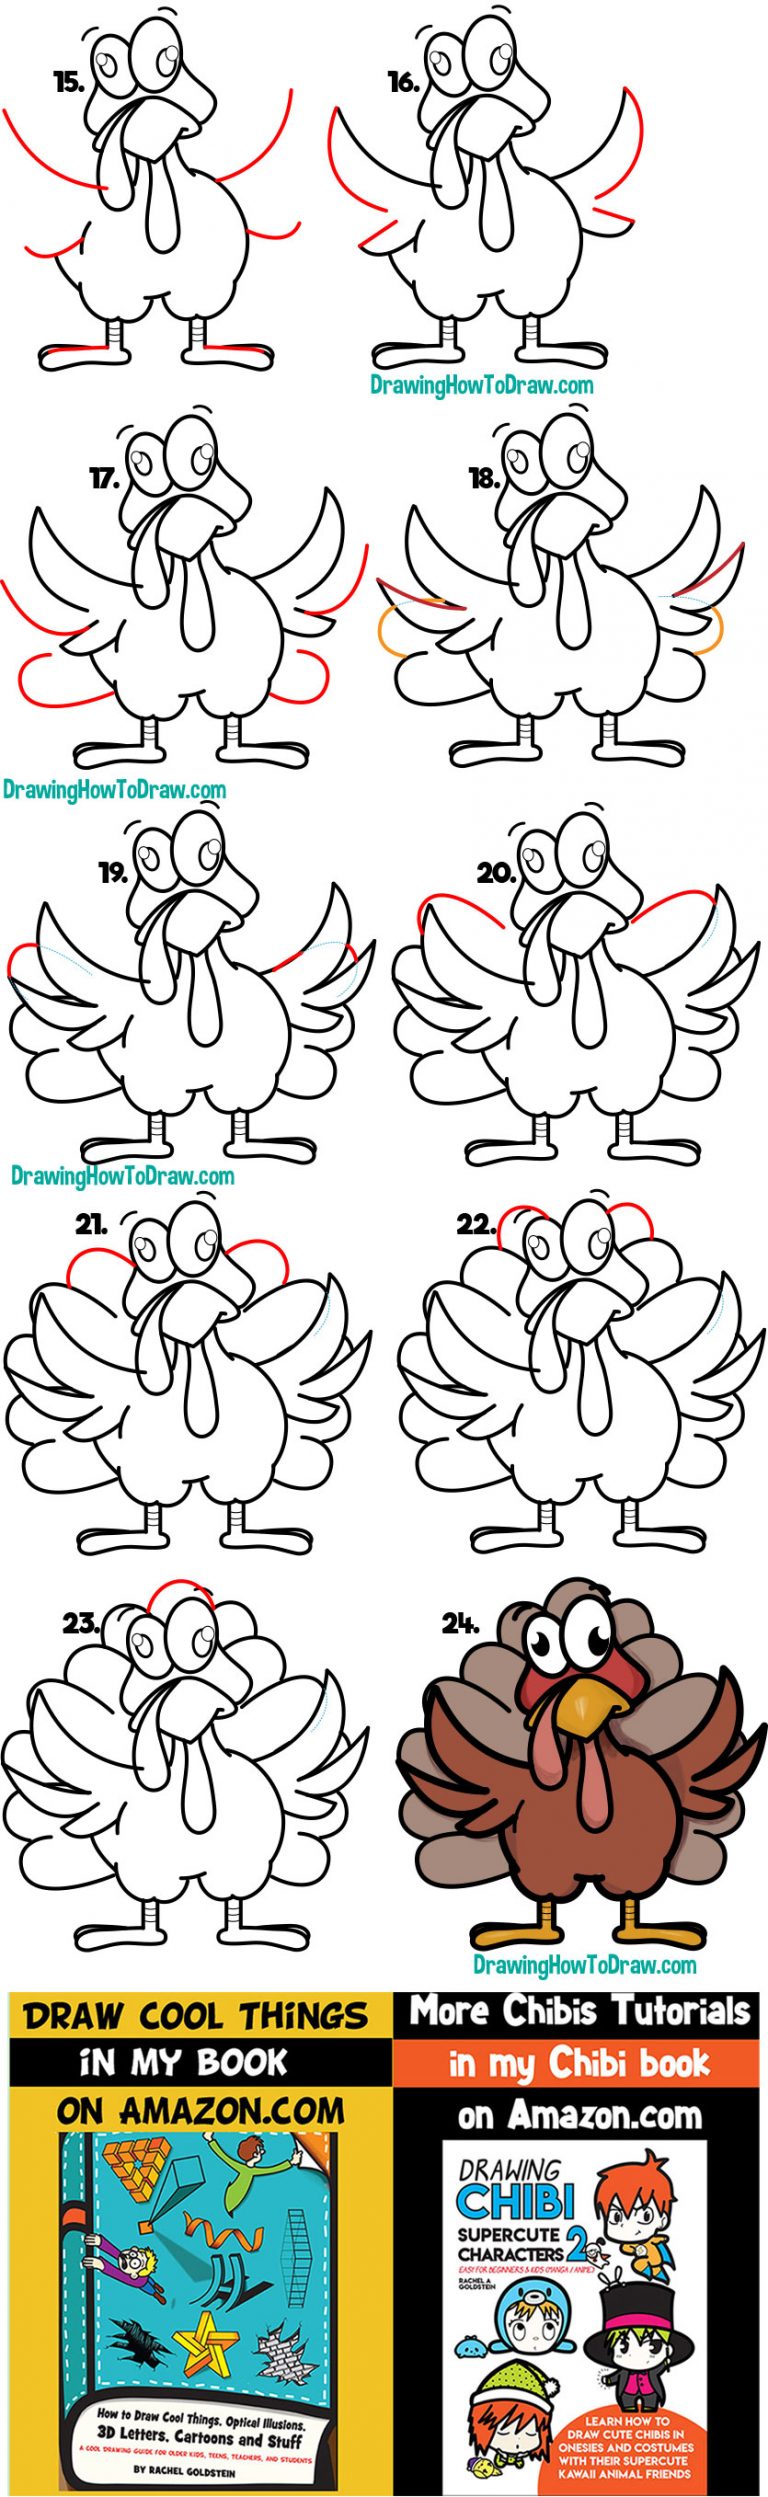  How To Draw A Turkey Step By Step Easy of the decade Check it out now 